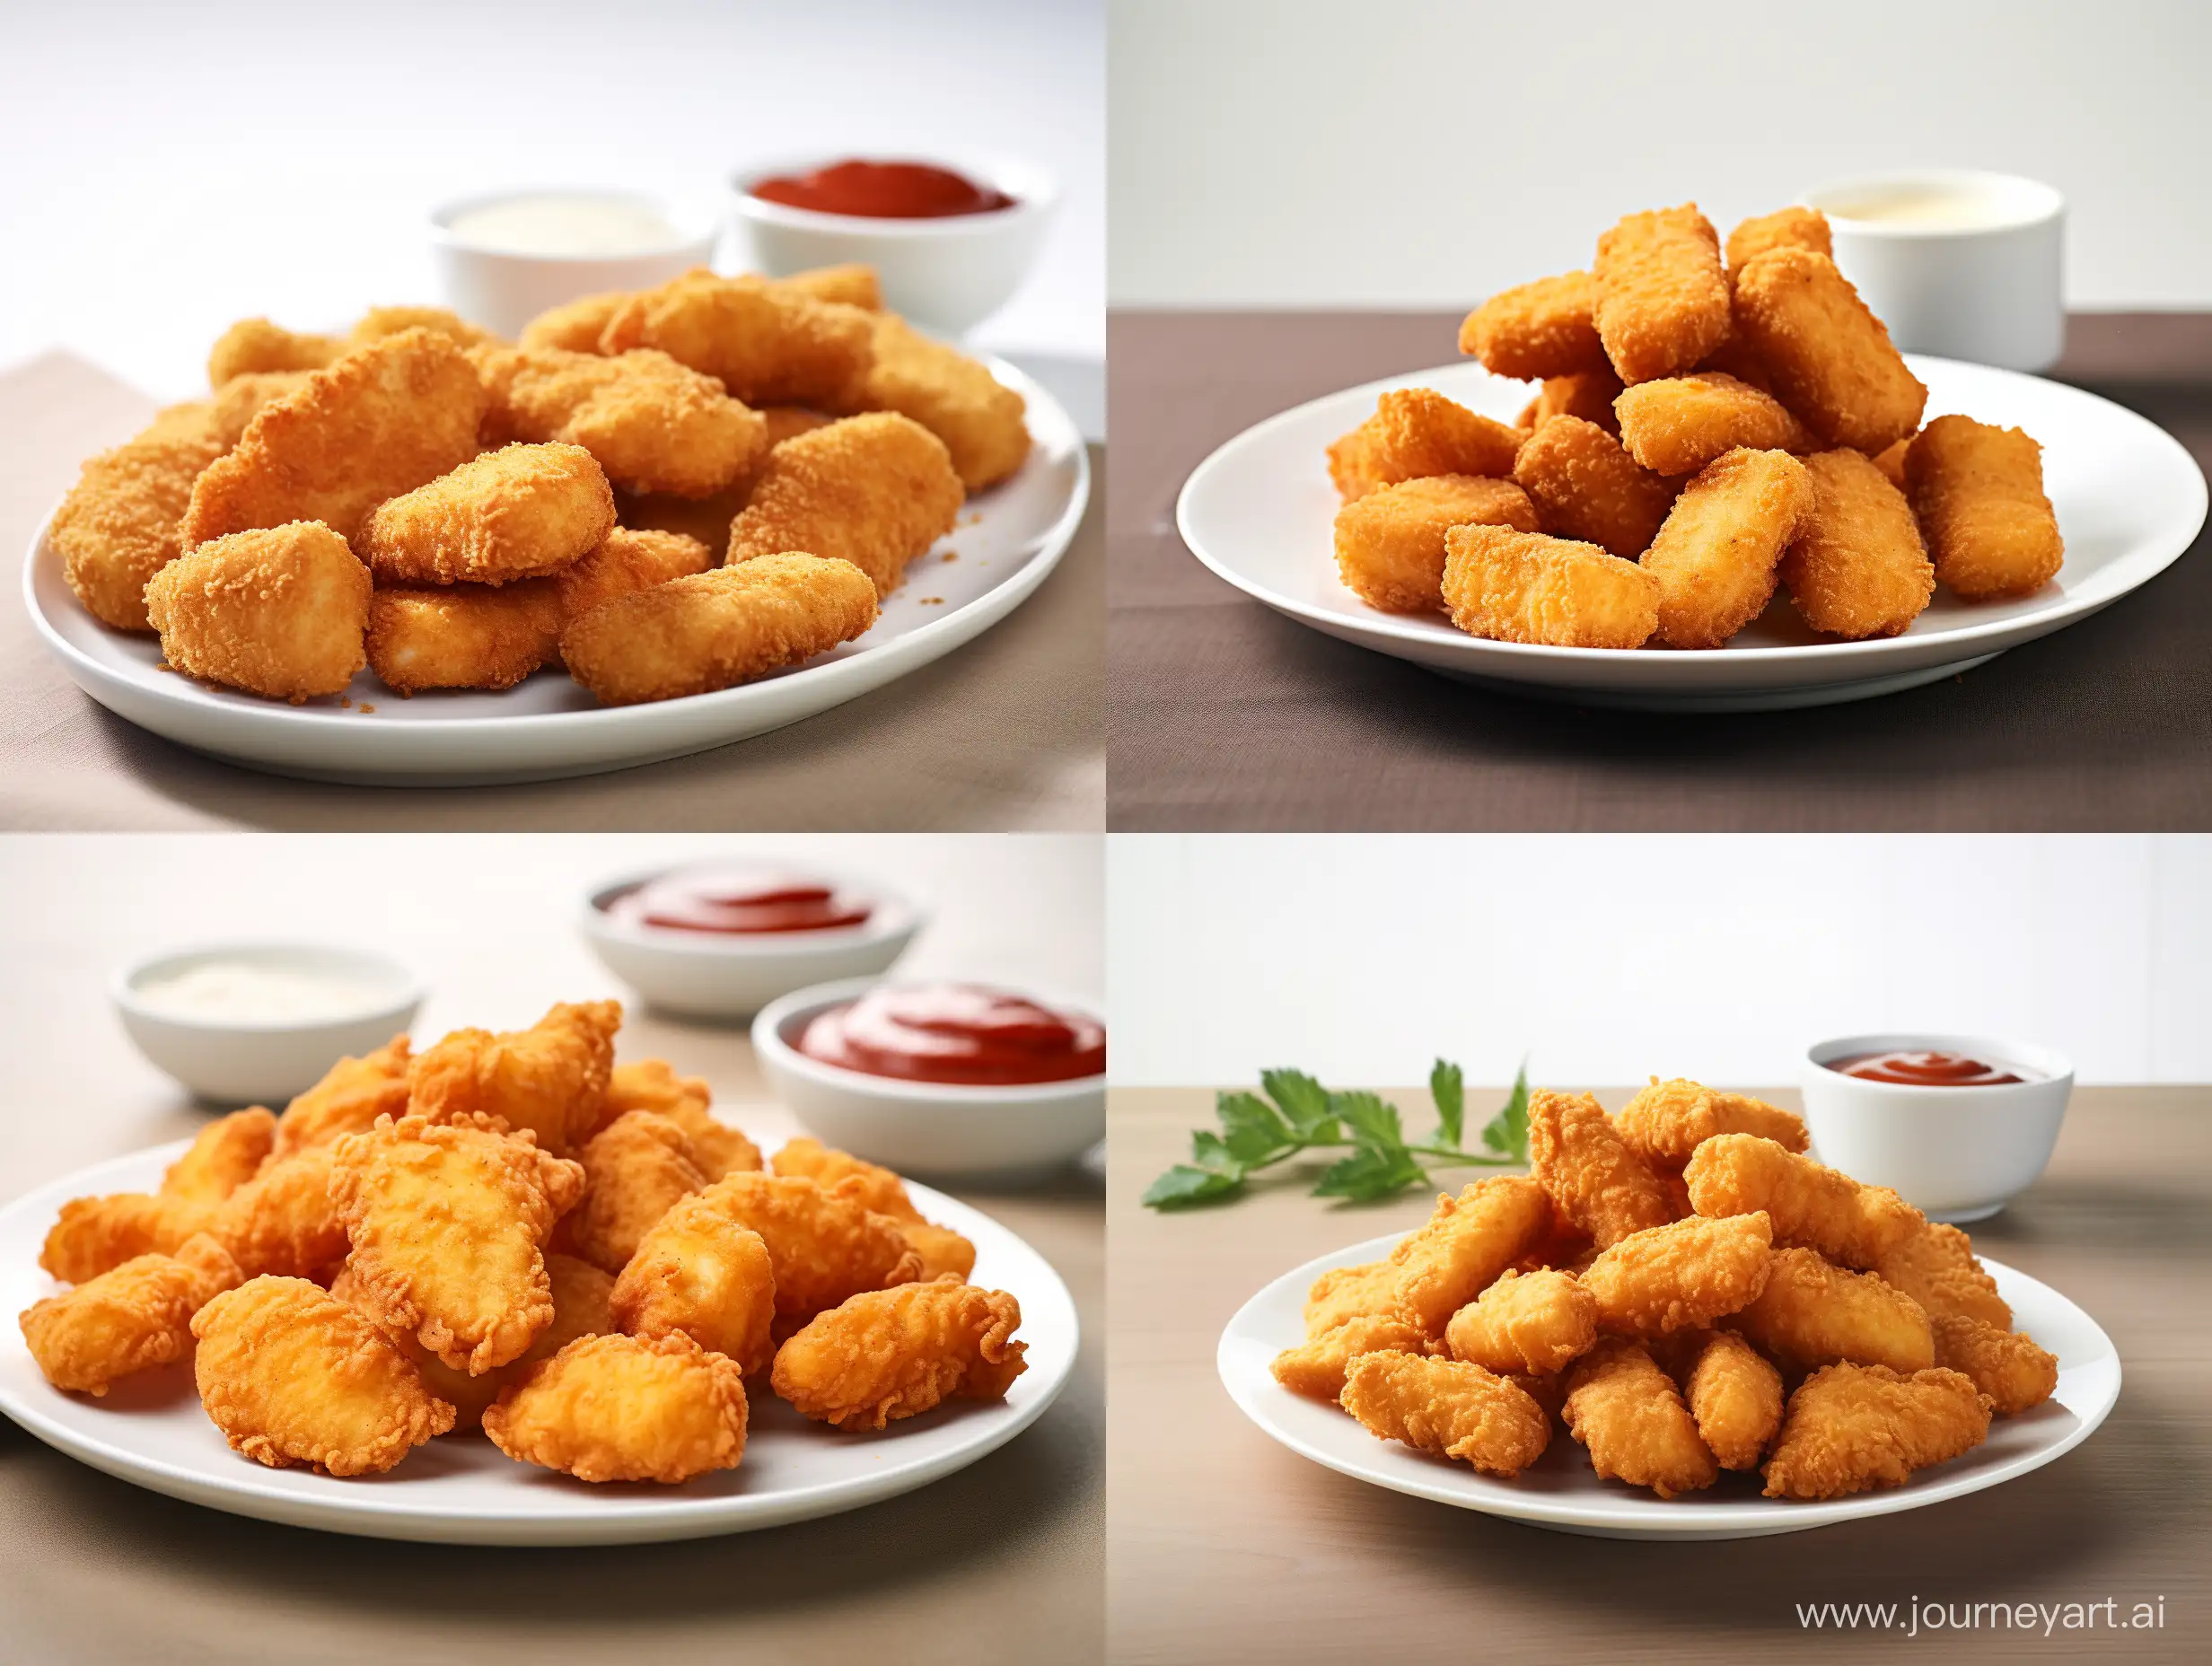 Crispy-Chicken-Nuggets-on-White-Plate-Delicious-Studio-Shot-with-Canon-DSLR-105mm-Lens